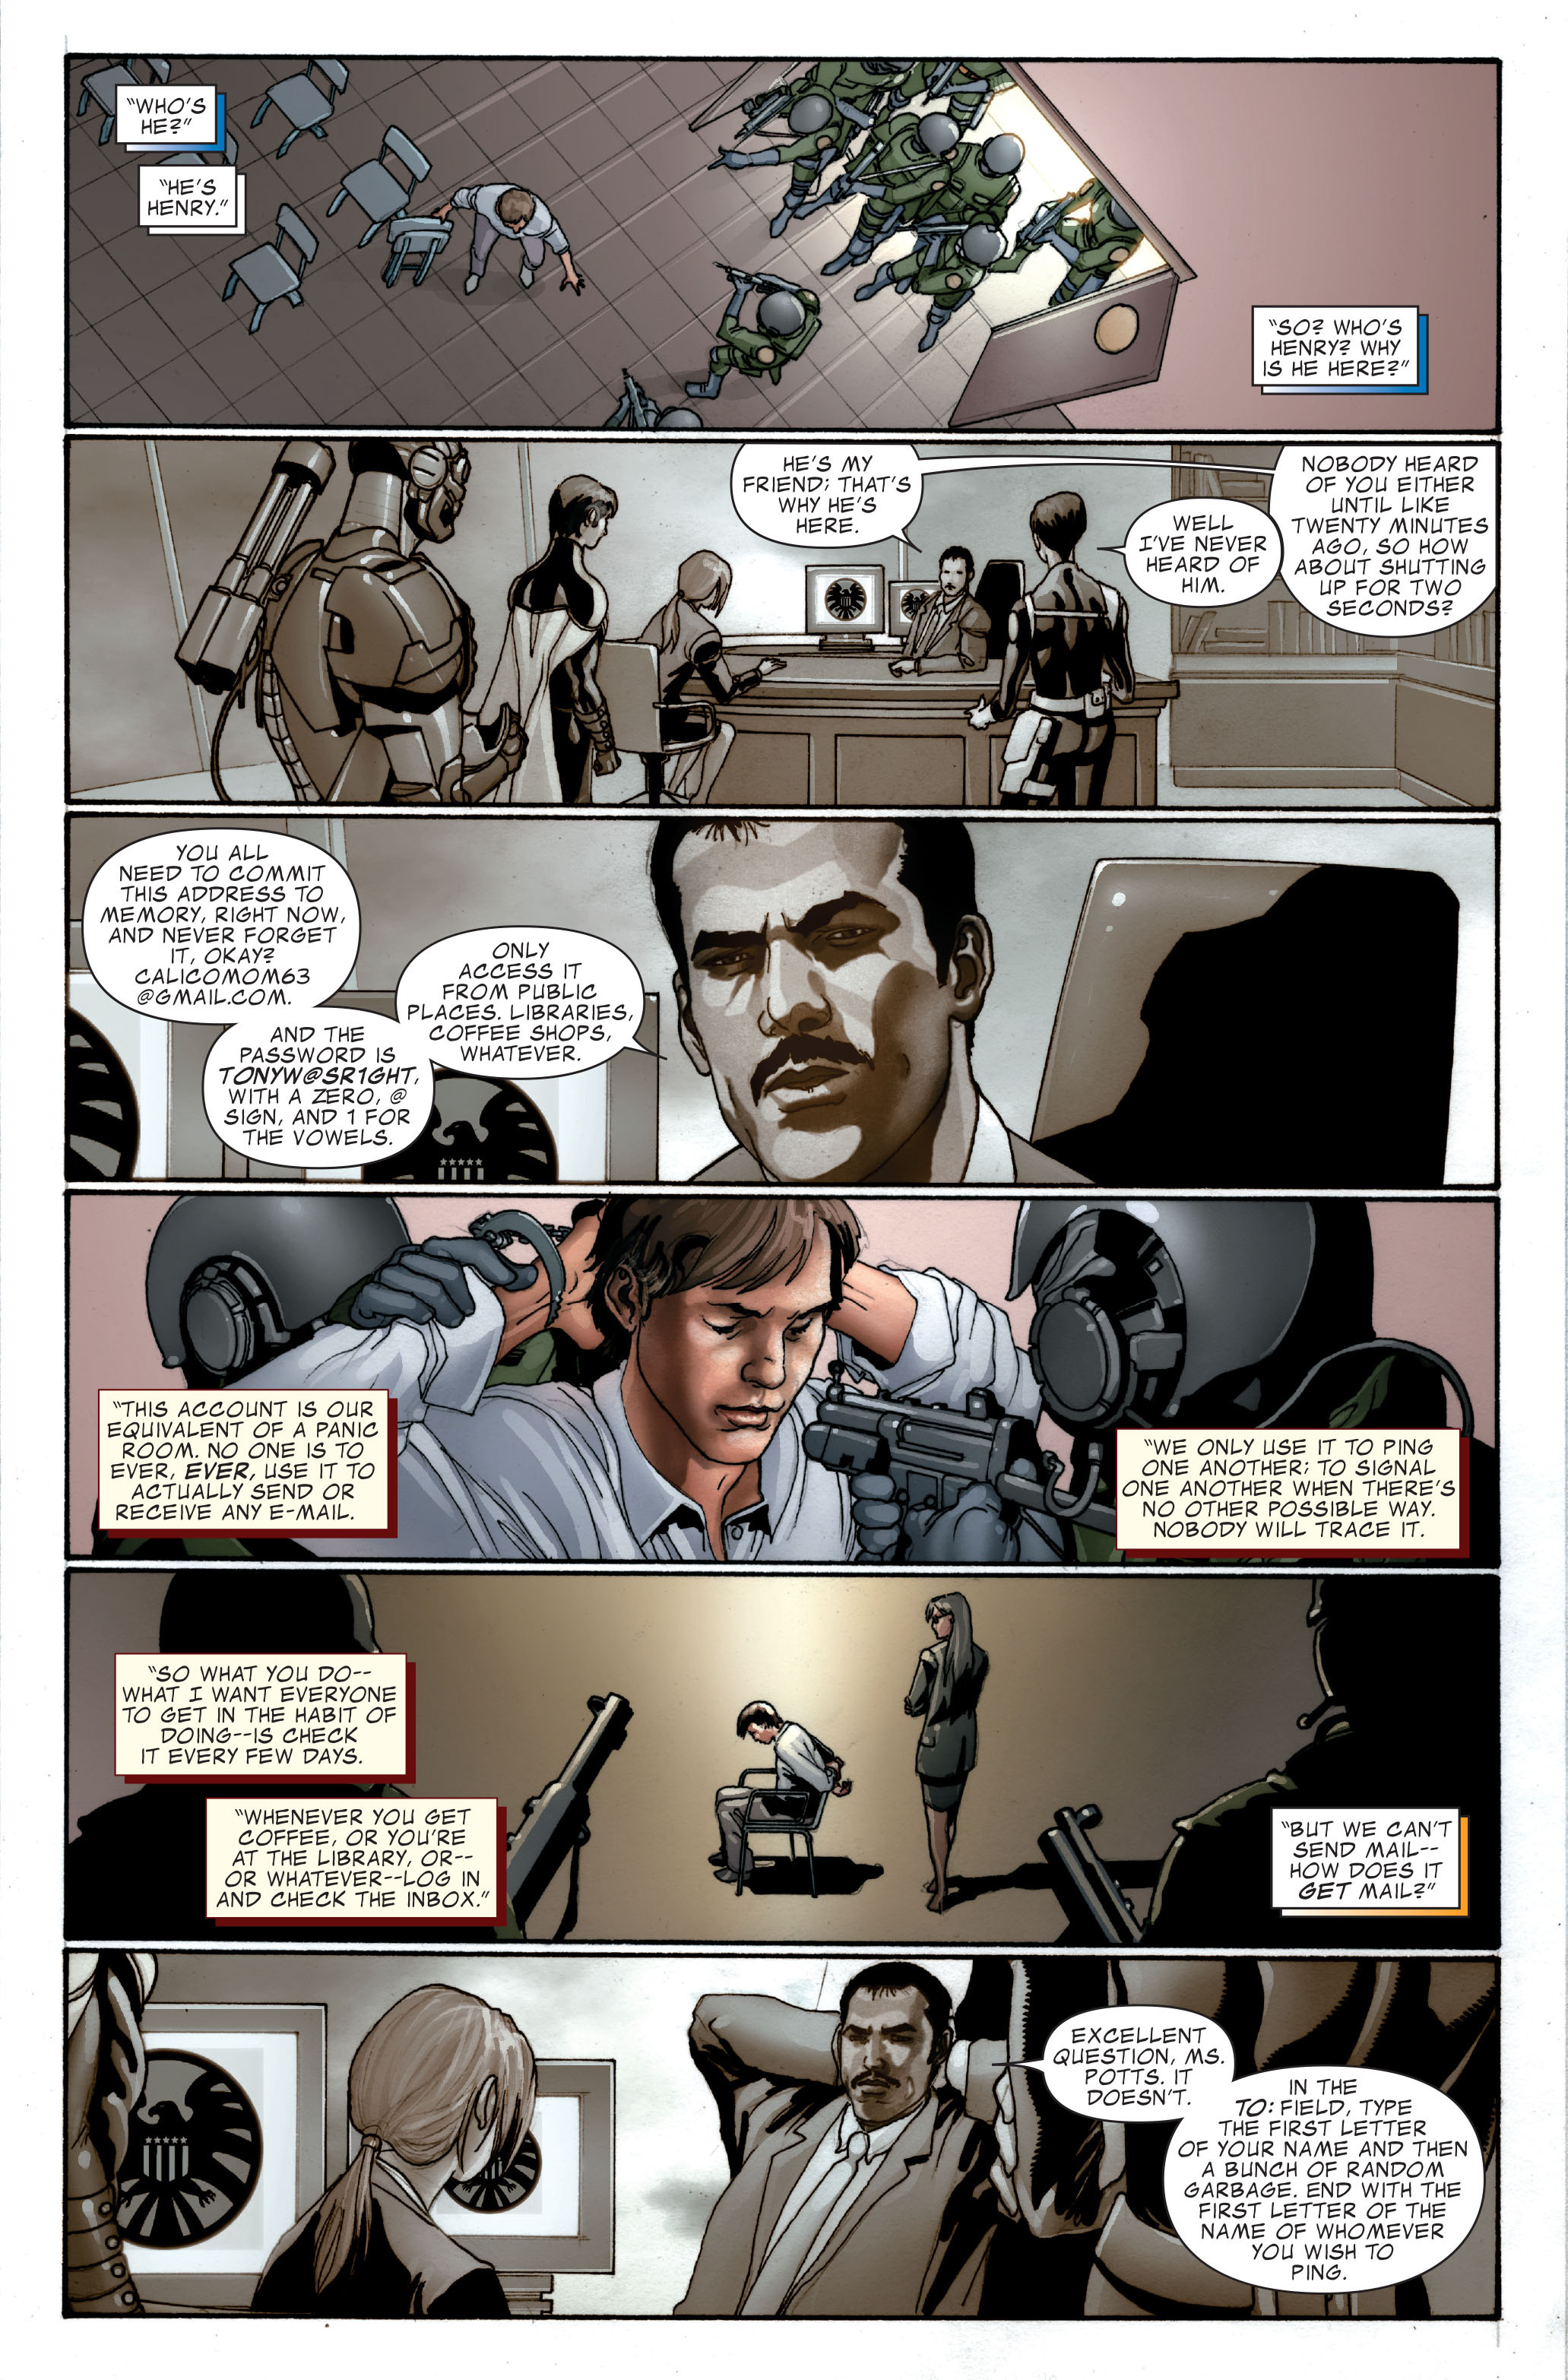 Invincible Iron Man (2008) 11 Page 9